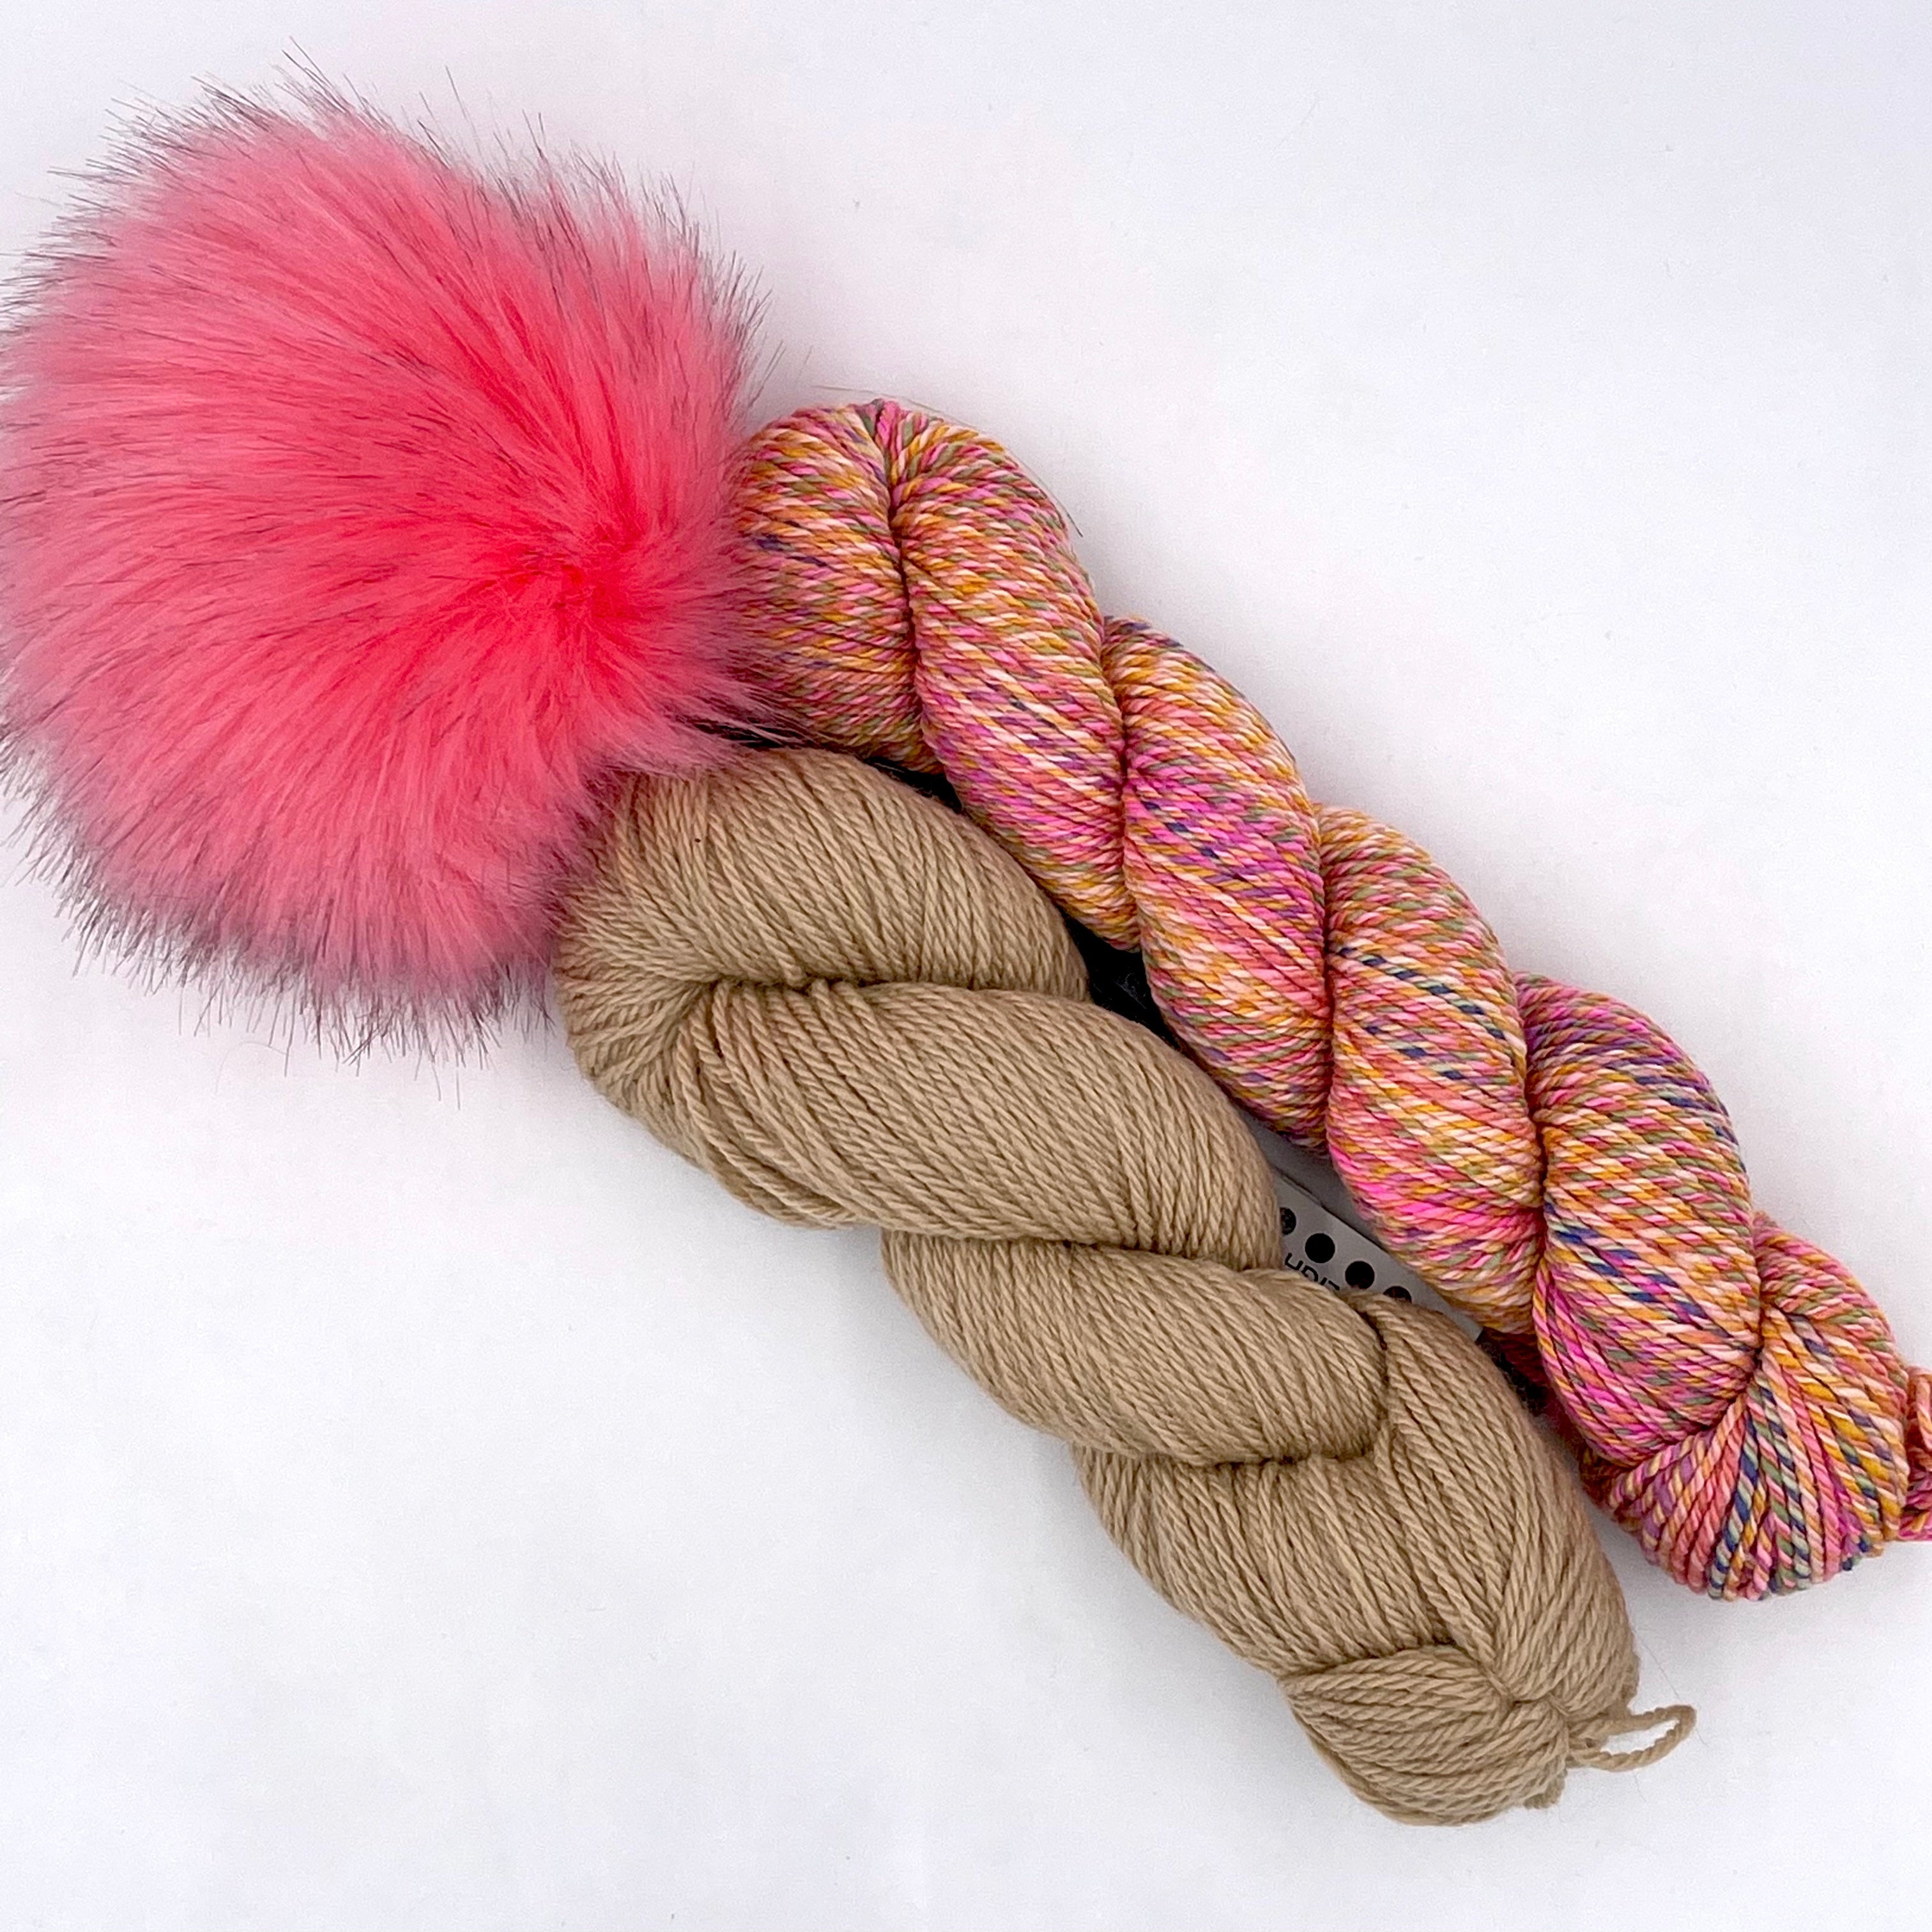 Flicker & Flame Hat Kit - Worsted Weight